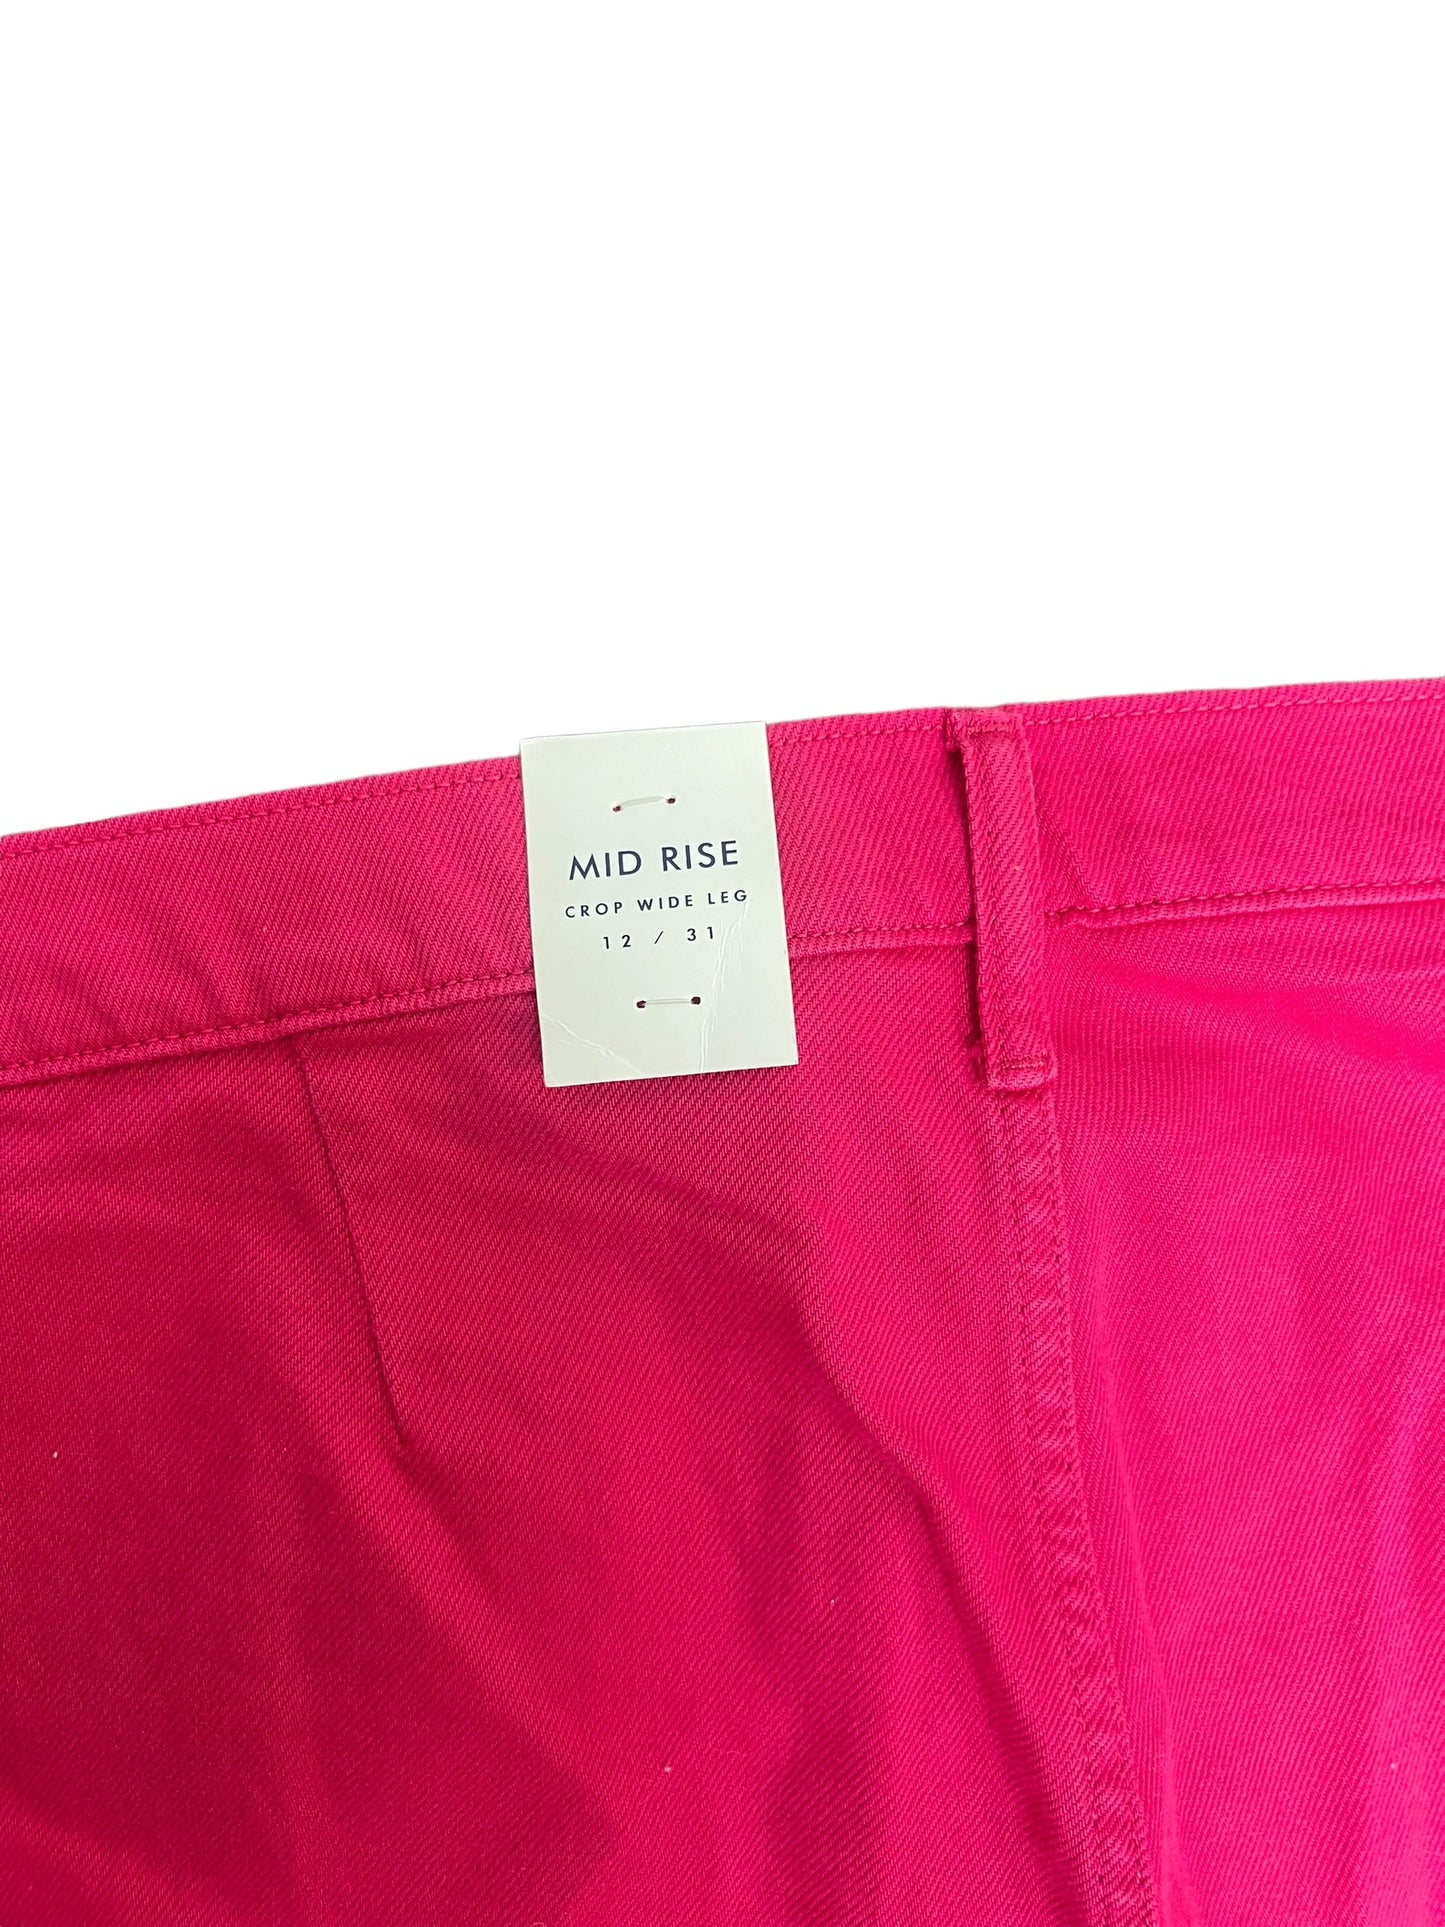 Pink Denim Jeans Cropped Lucky Brand, Size 12